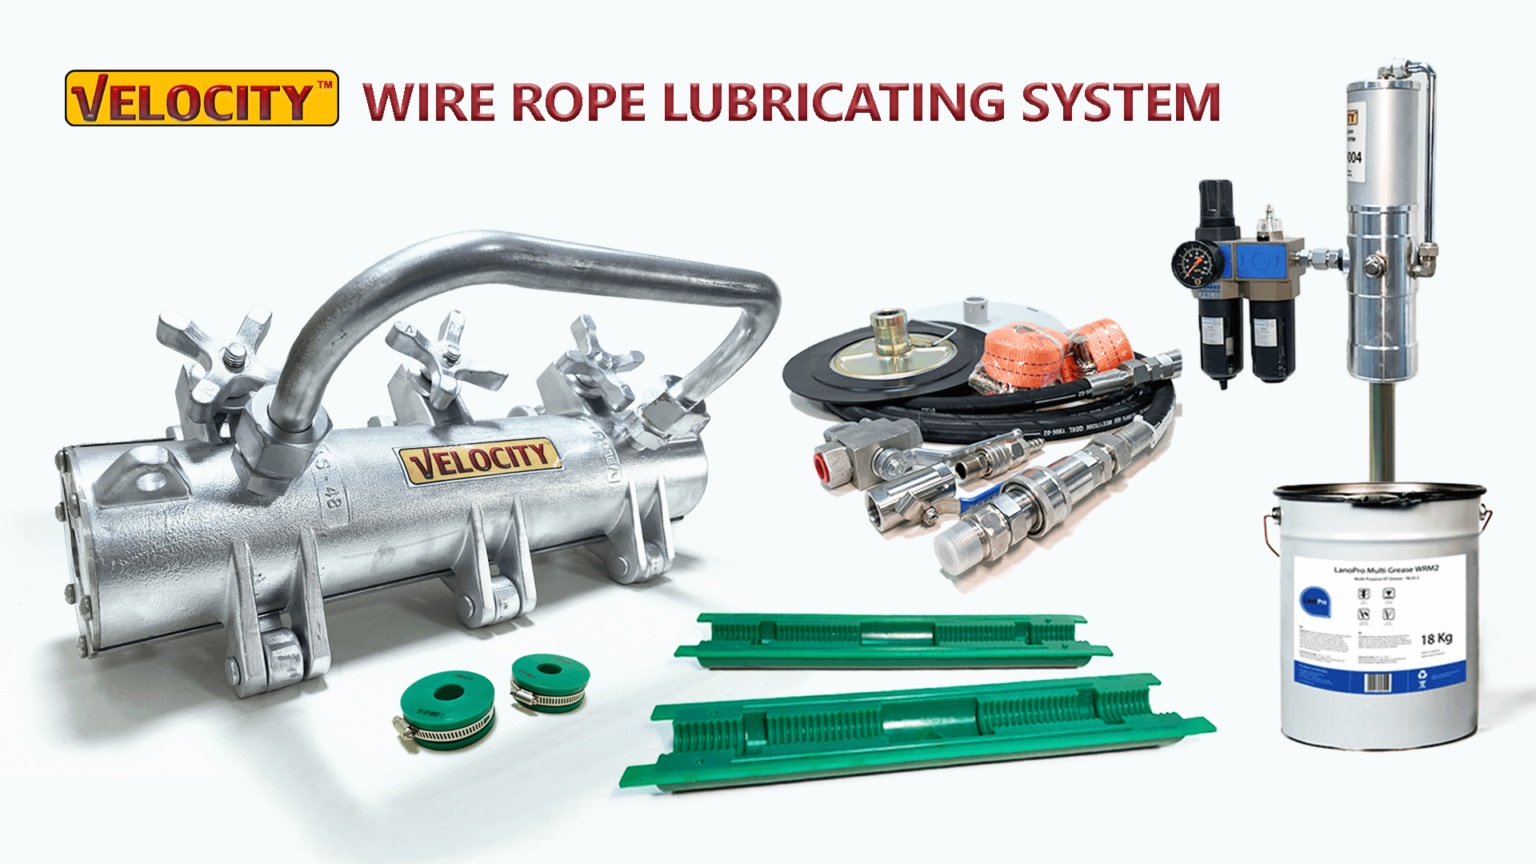 Wire rope lubricating system